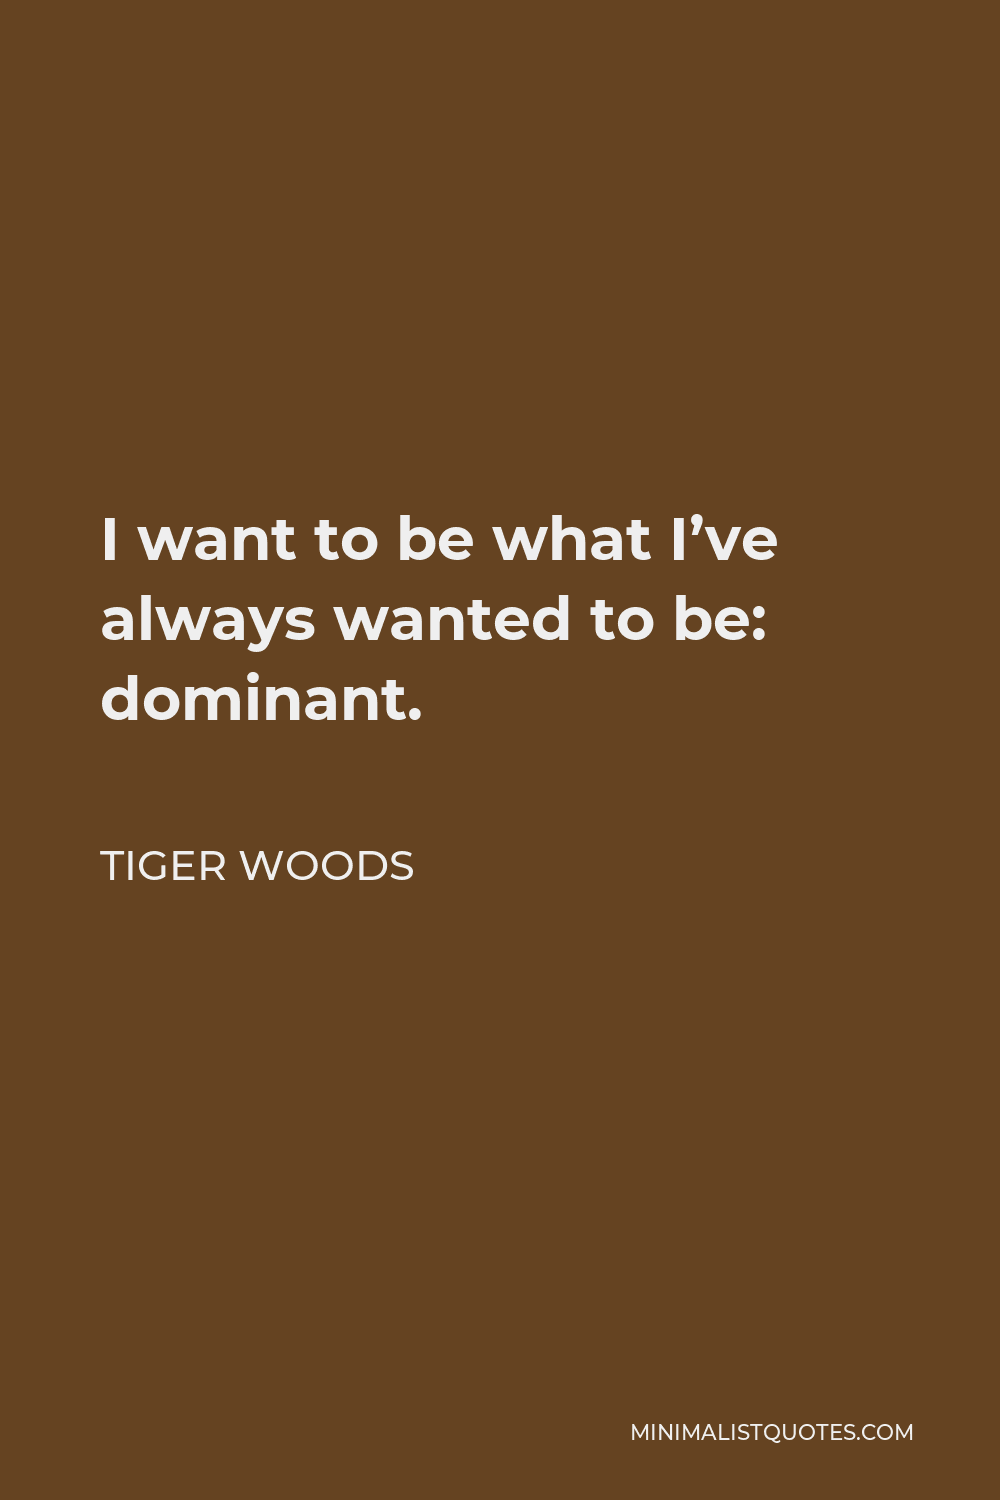 Tiger Woods Quote - I want to be what I’ve always wanted to be: dominant.